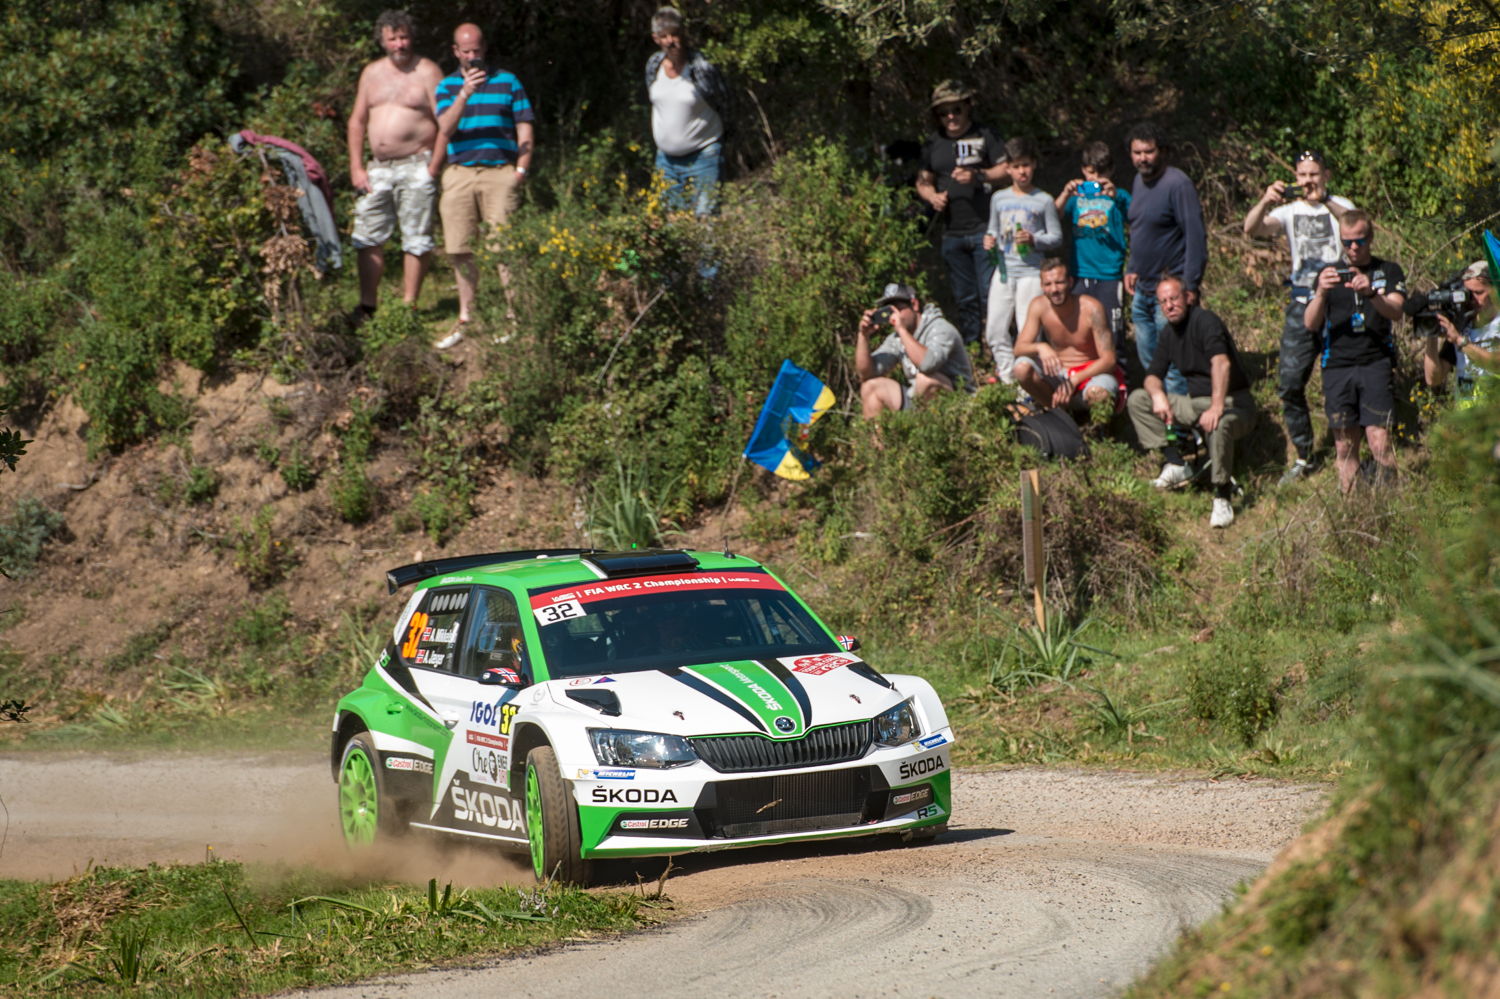 Storming to first place in the WRC 2 category at the Tour de Corse with their ŠKODA FABIA R5 after the first leg: Andreas Mikkelsen/Anders Jæger-Synnevaag.